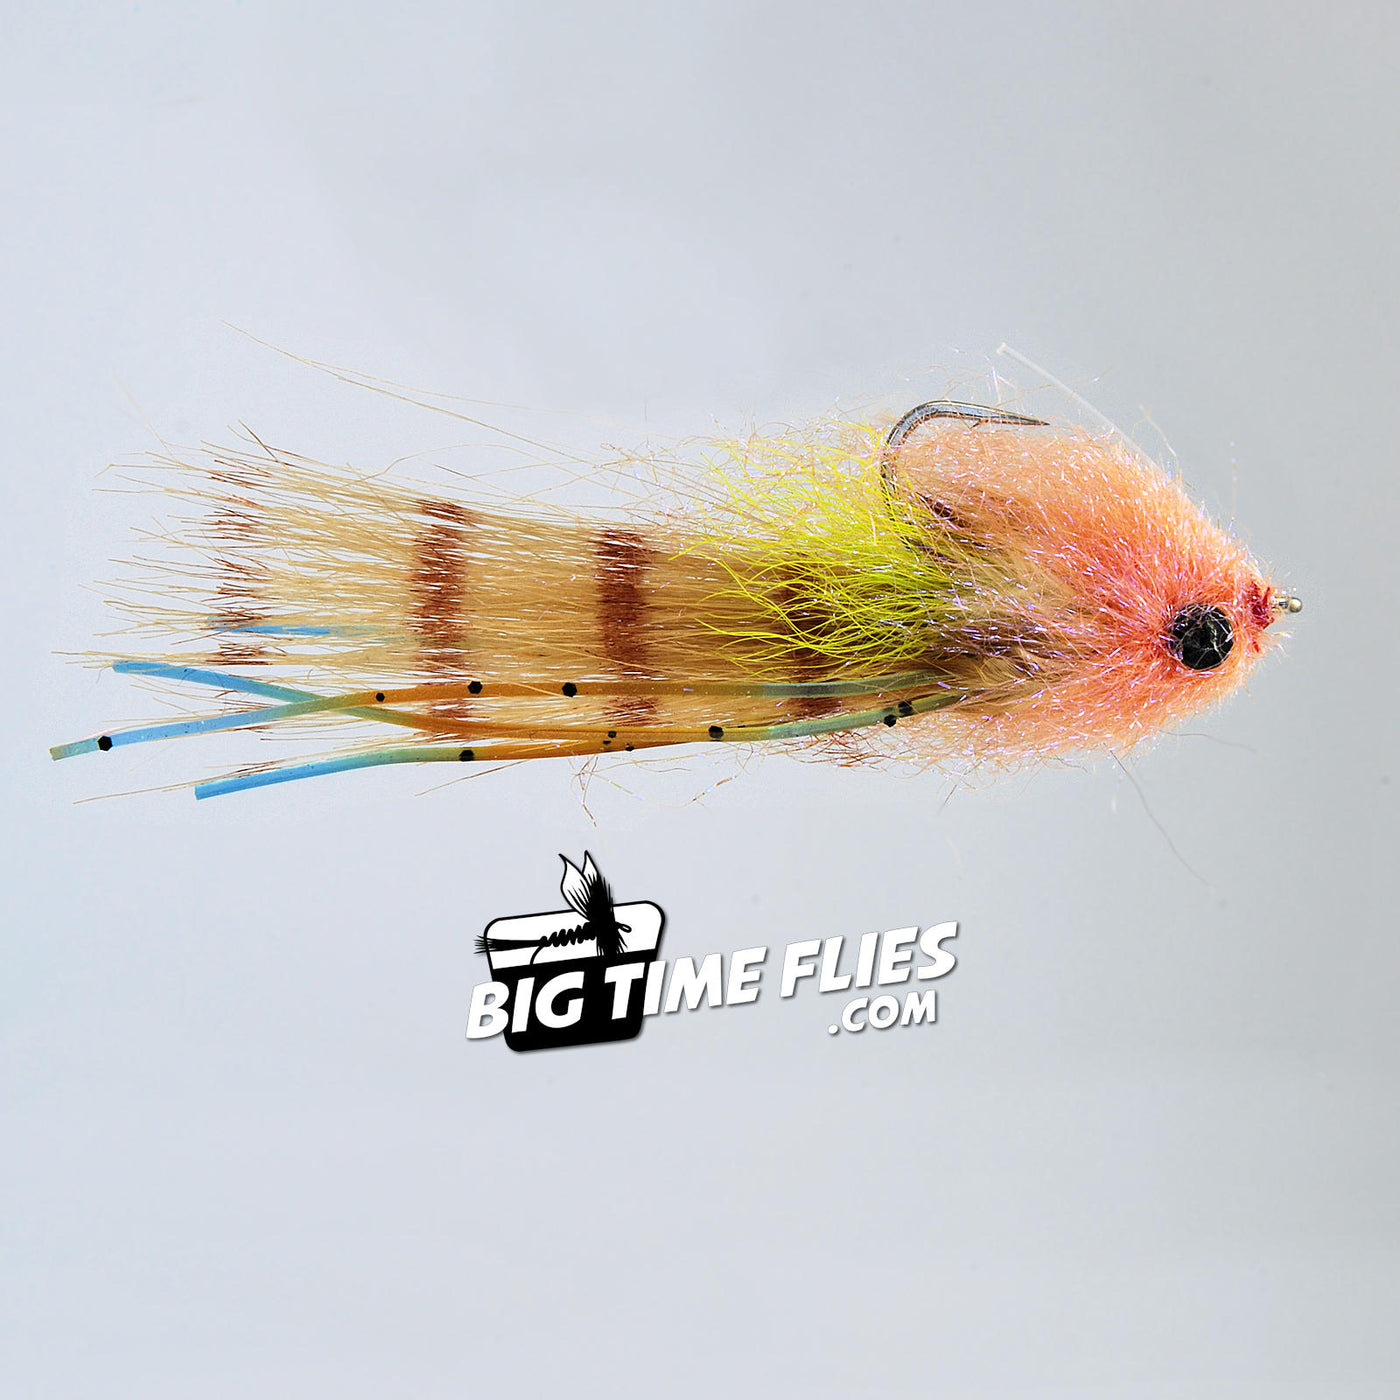 Grizzly Shrimp Brown,Discount Saltwater Flies, For Fly Fishing Redfish